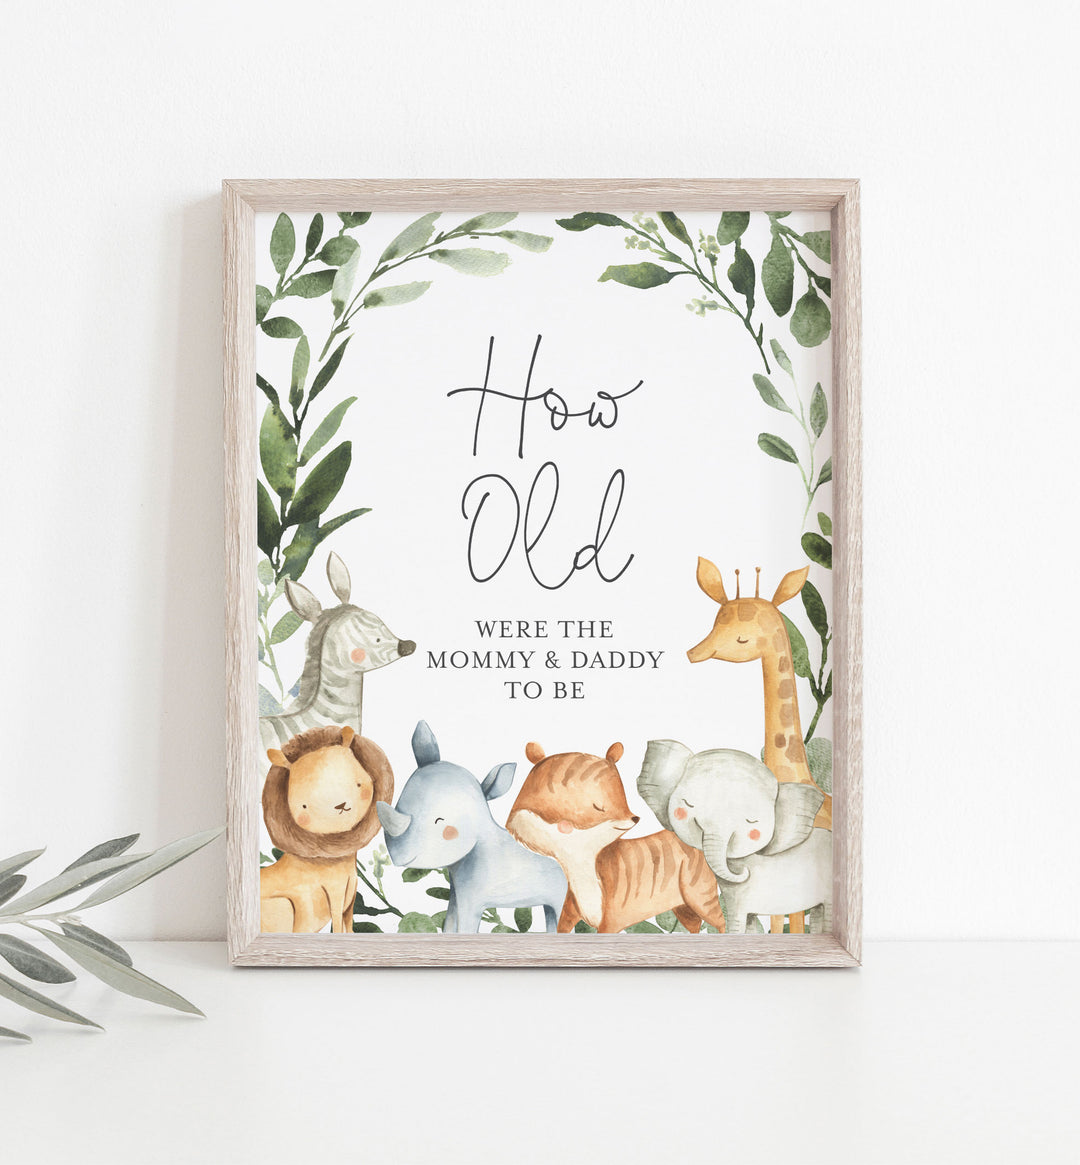 Safari Animals Baby Shower How Old Were The Mummy and Daddy To Be Game Printable